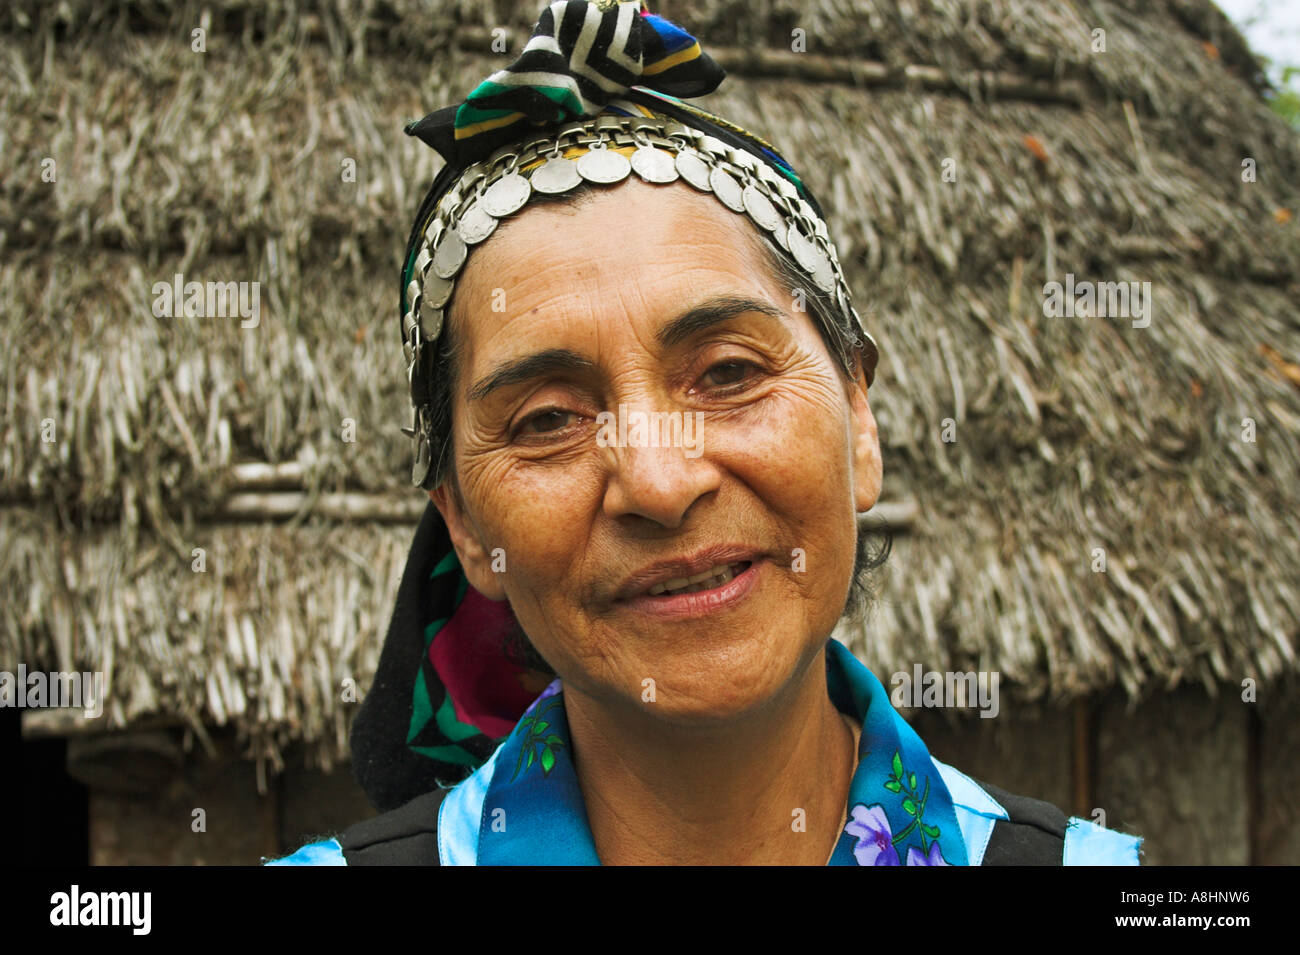 Native Woman Of The Mapuche Tribe Chile Stock Photo 6919509 Alamy